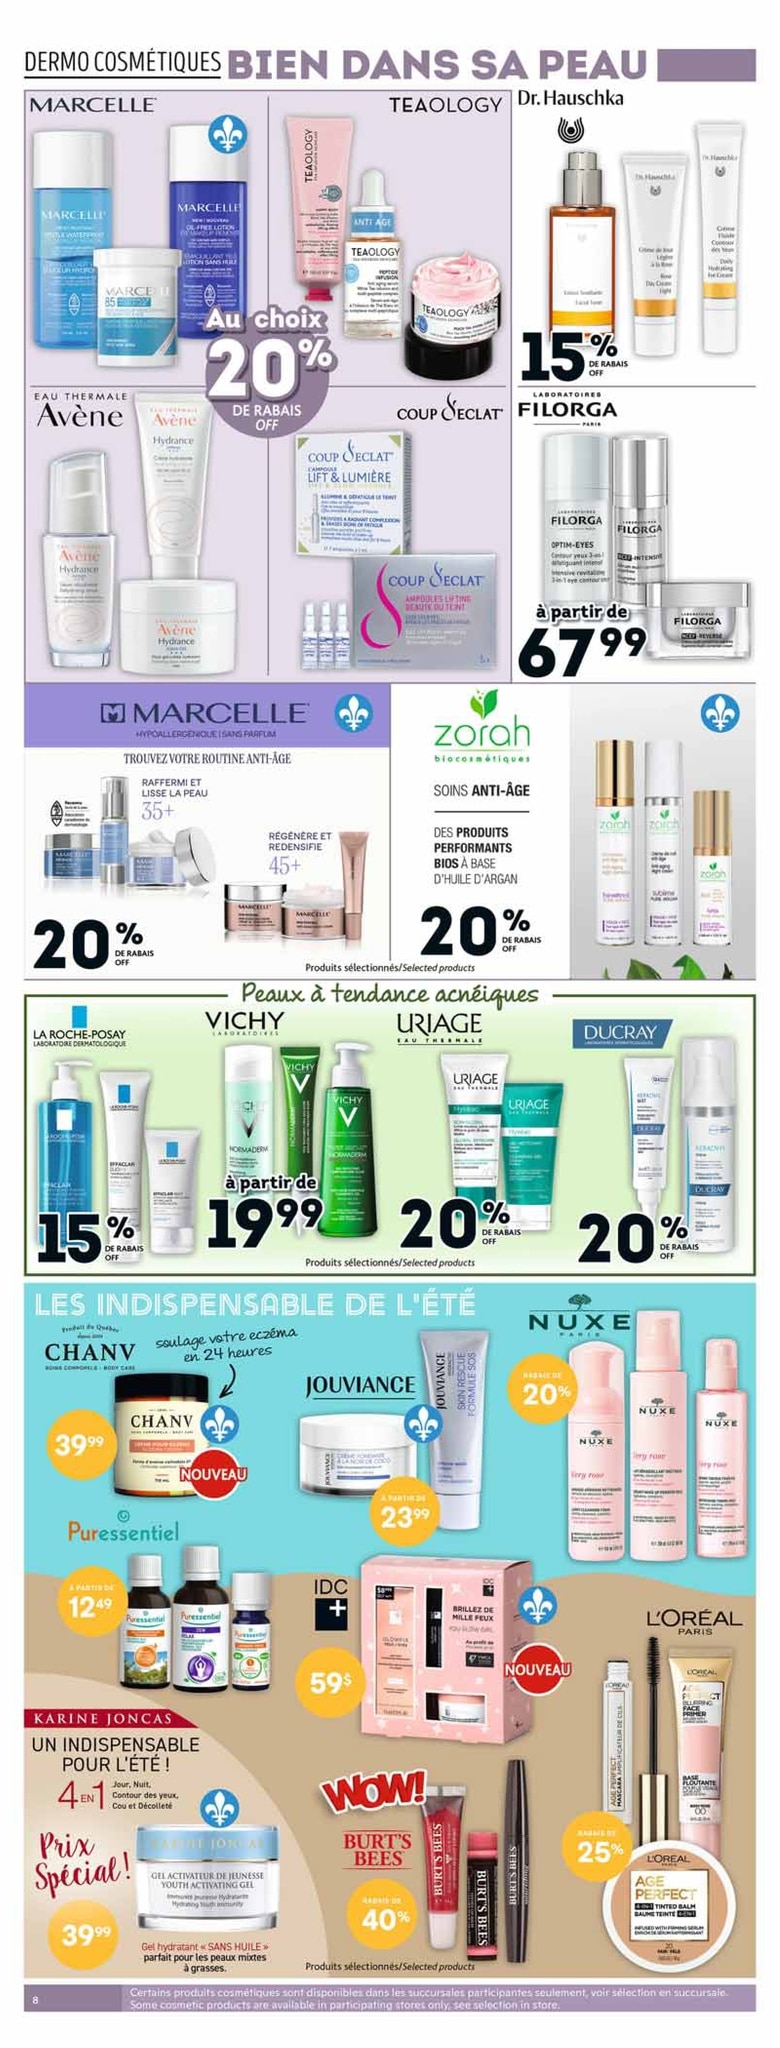 Circulaire Brunet - Pharmacie - Page 8